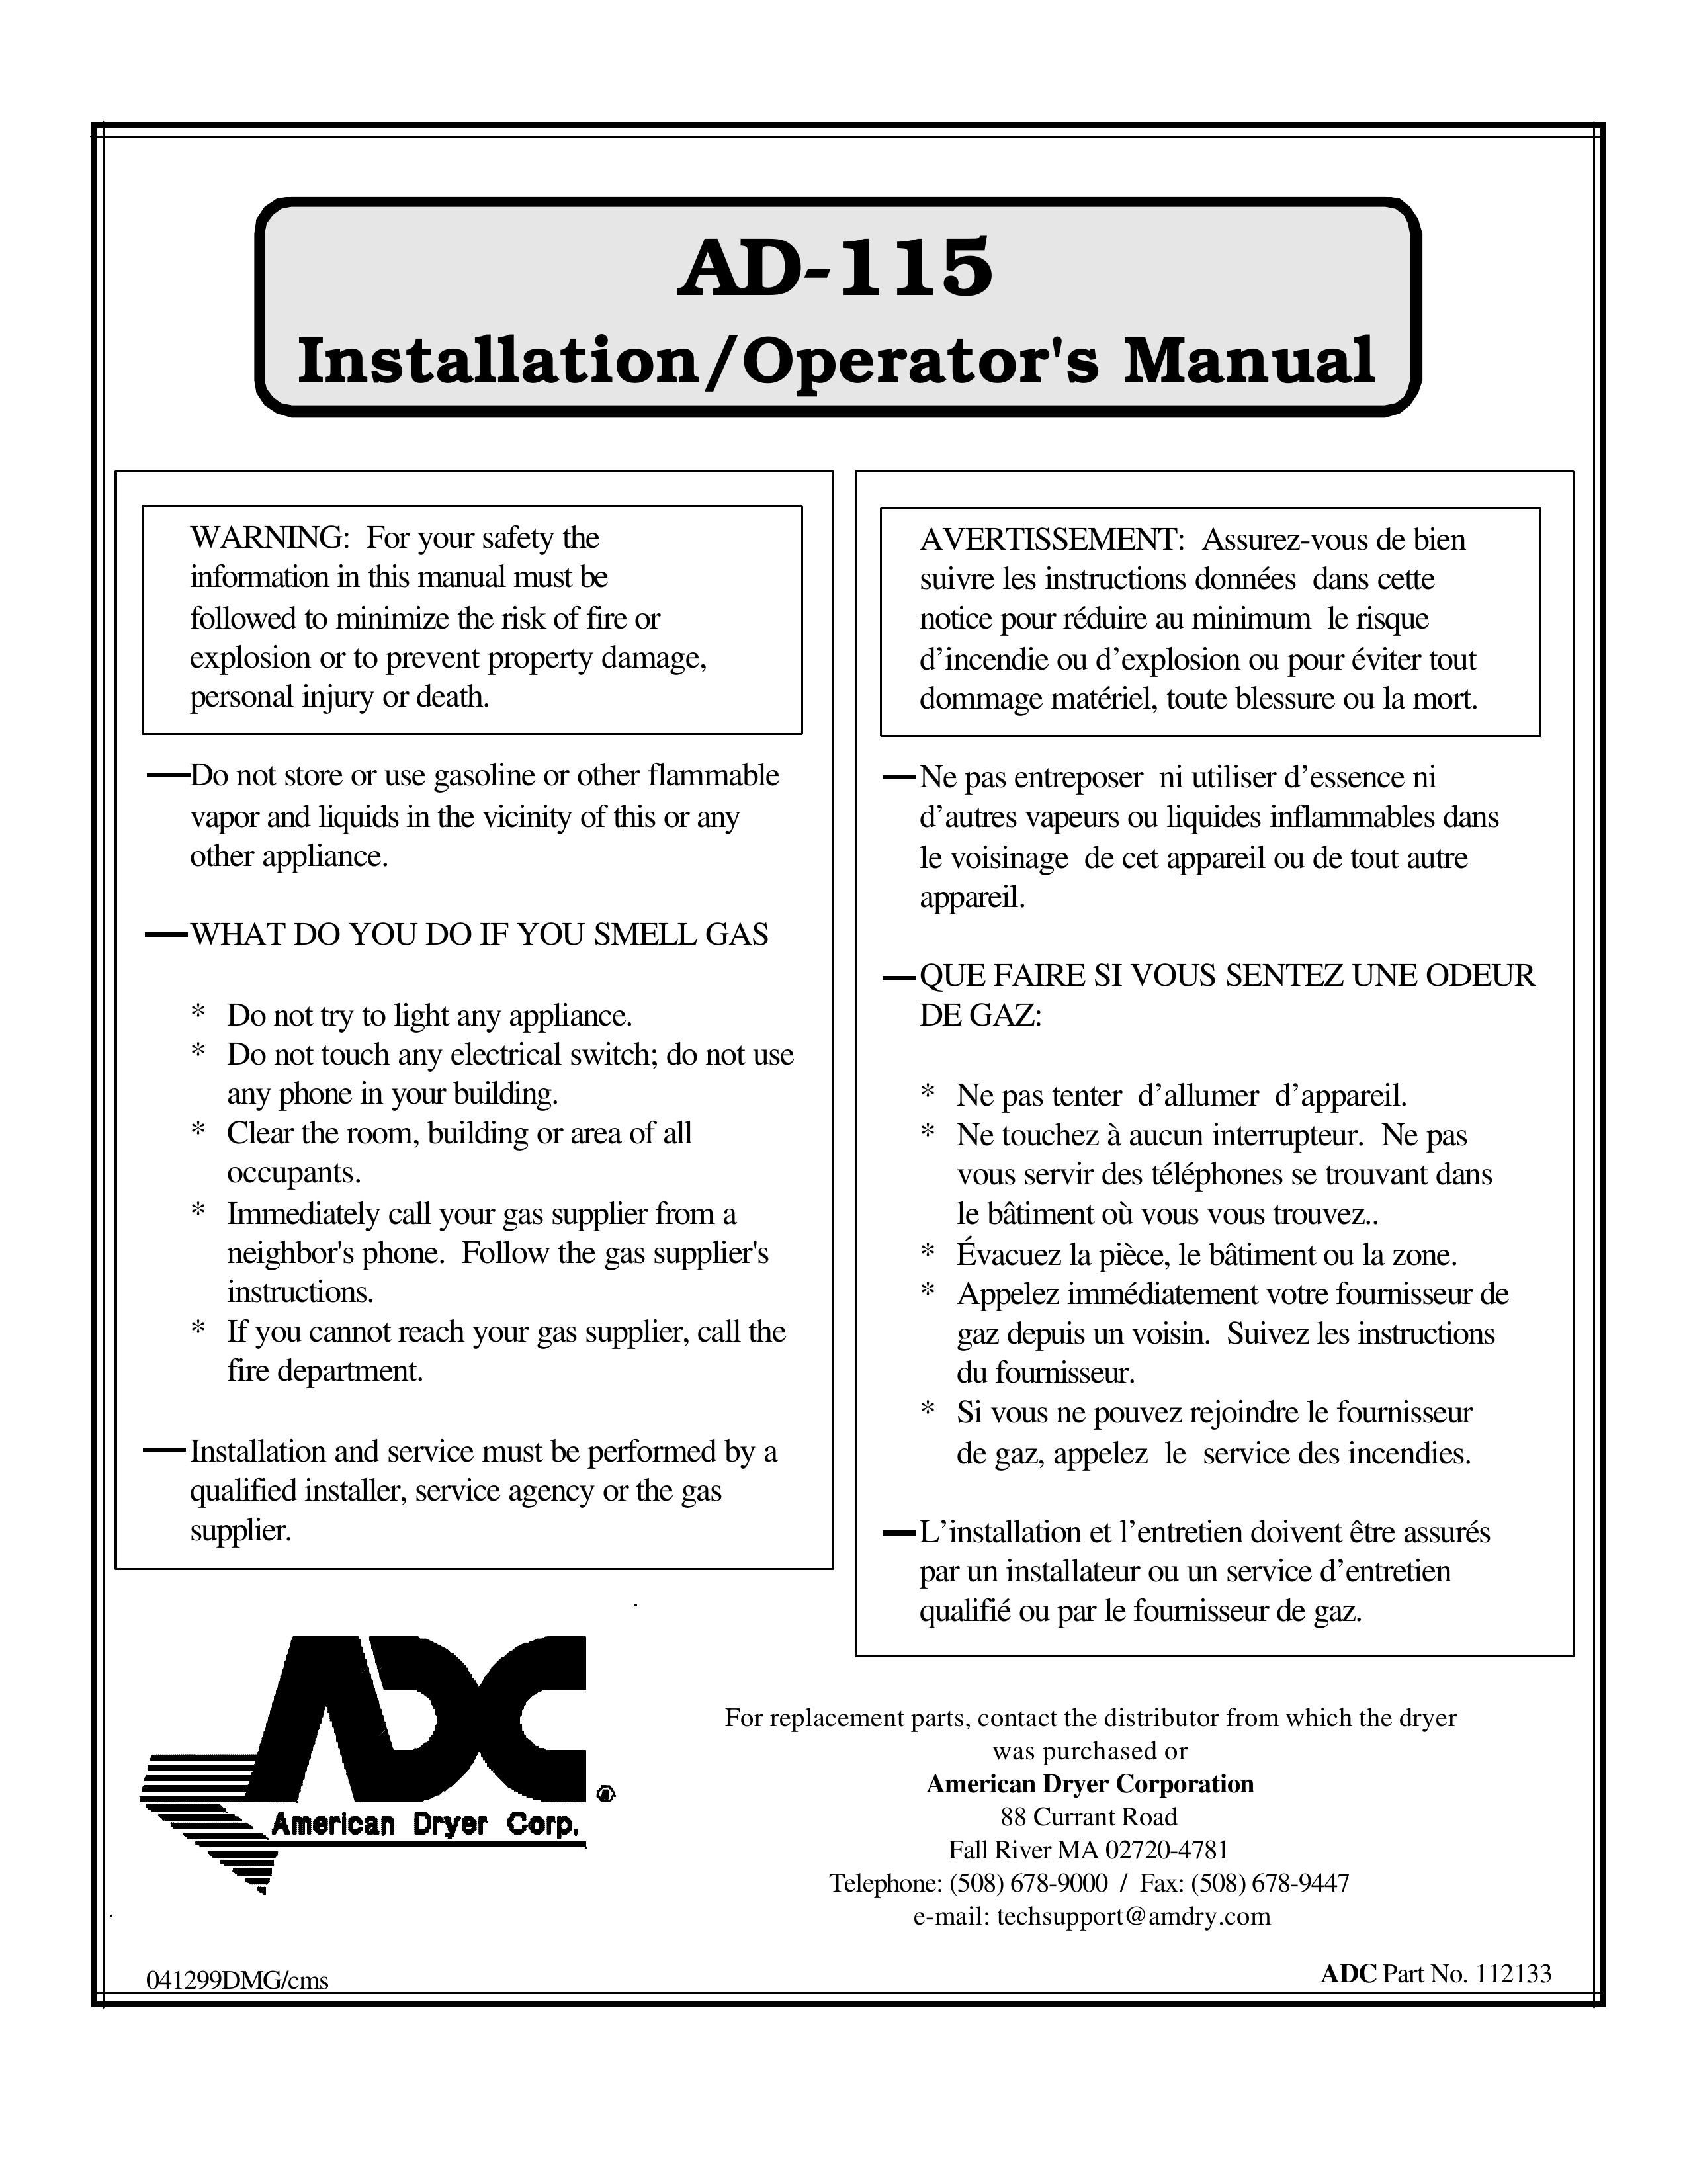 American Dryer Corp. AD-115 Clothes Dryer User Manual